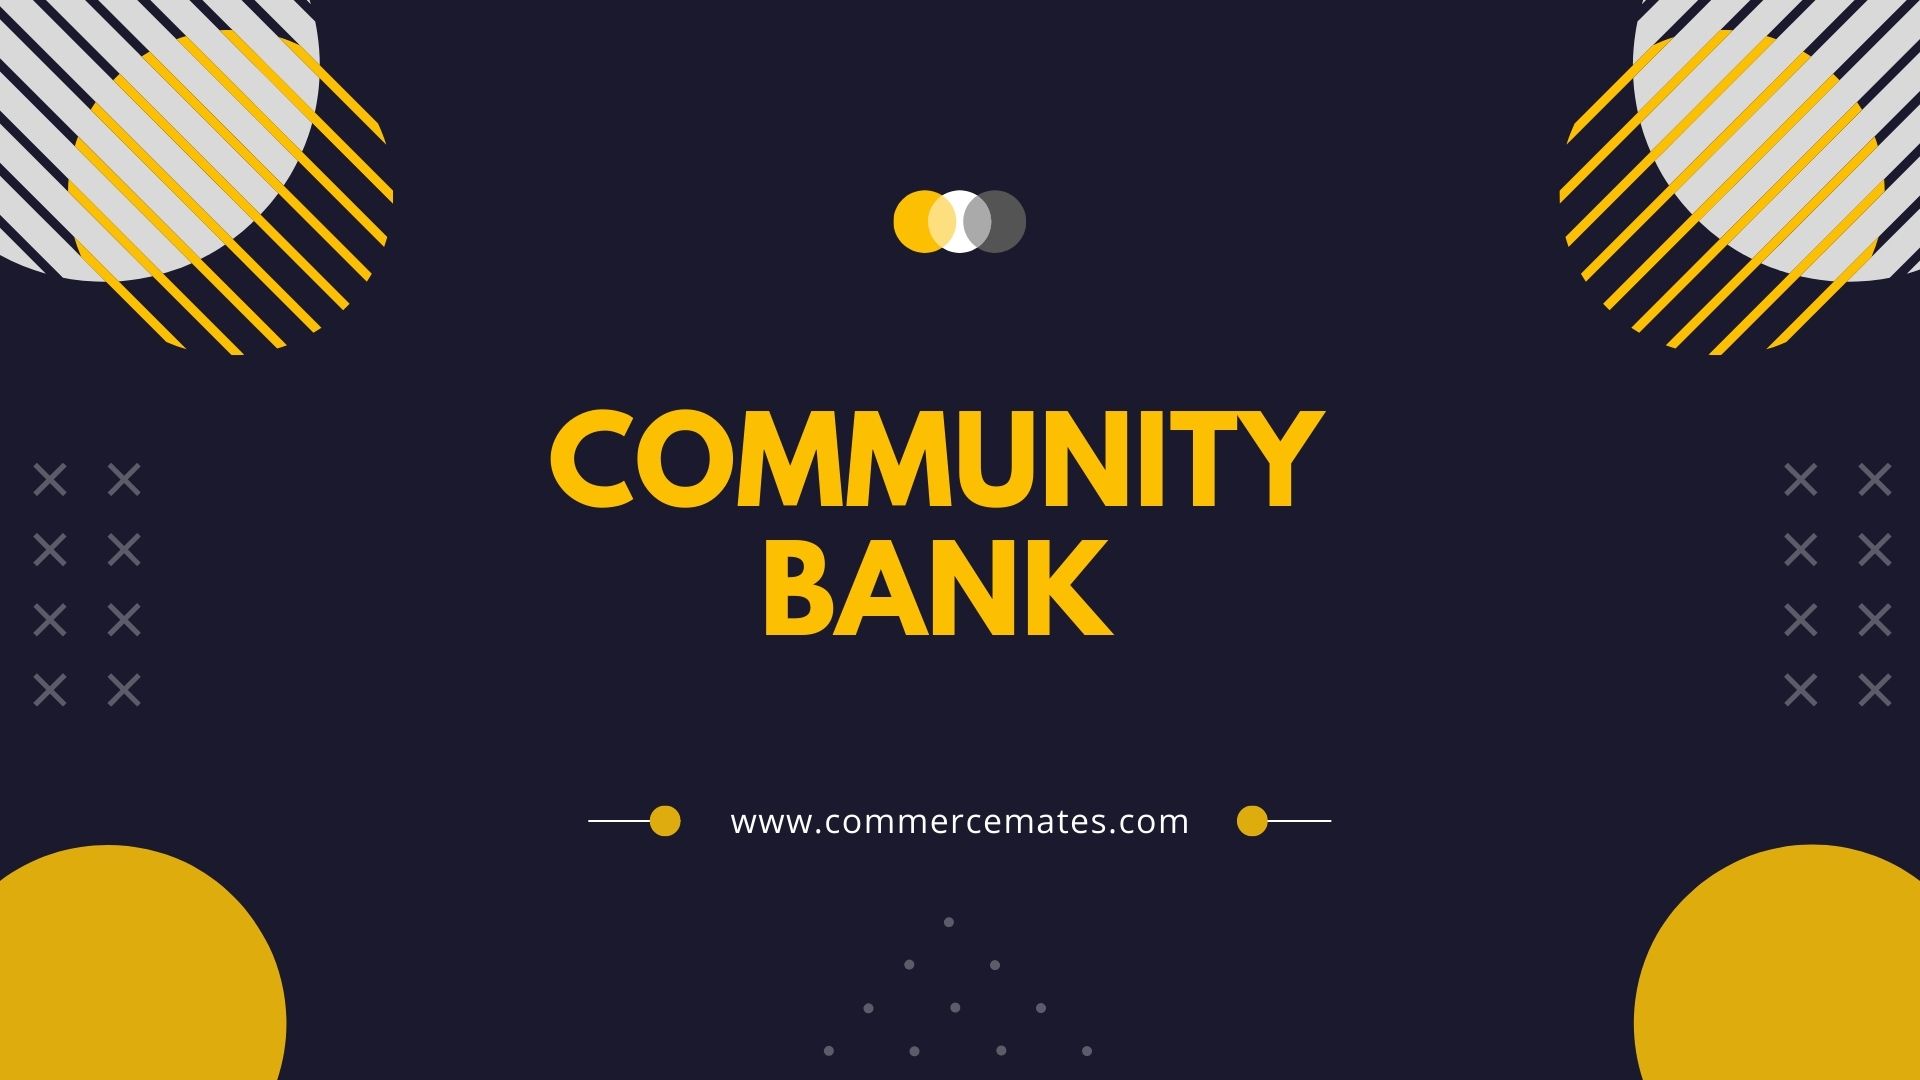 Community Bank: Pros and Cons, Community Bank vs Large Bank